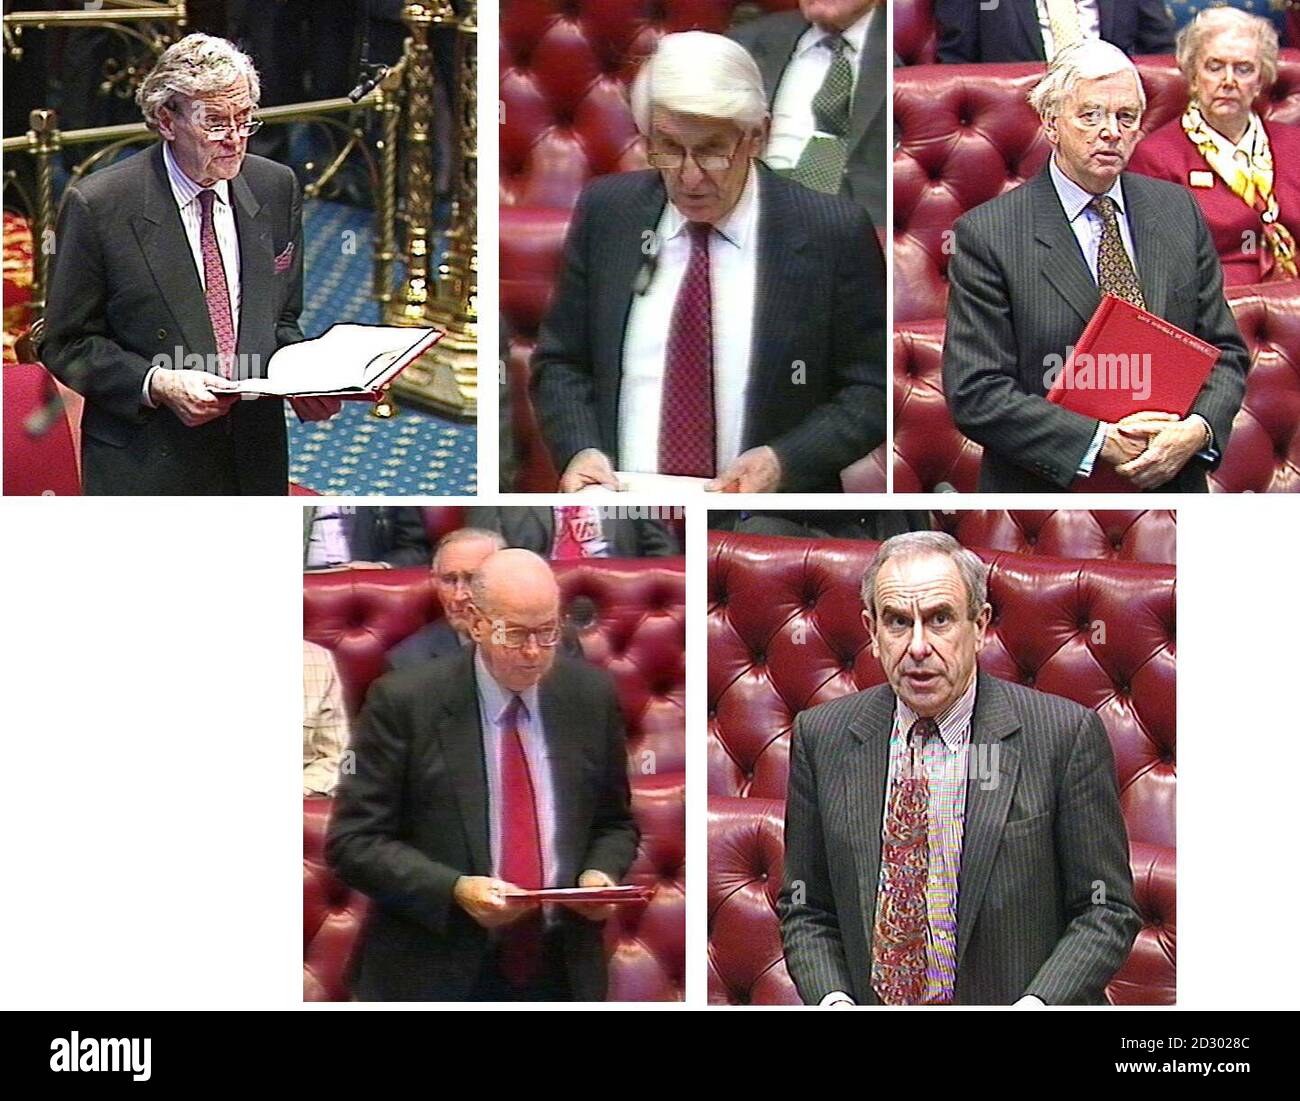 Composite pictures of the five Law Lords (in the order in which they spoke) in the House of Lords, Wednesday 25, Nobvember, 1998, where, in a split 3-2 judgement, they overturned the High Court's October 28 ruling that former Chilean dictator General Augusto Pinochet had immunity from arrest and the legal processes of the English courts. Top row from left: Lord Slynn of Hadleigh, Lord Lloyd of Berwick, Lord Nickells of Birkenhead. Front row, from left: Lord Steyn and Lord Hoffmann. Note to eds: best quality available. V/G Stock Photo